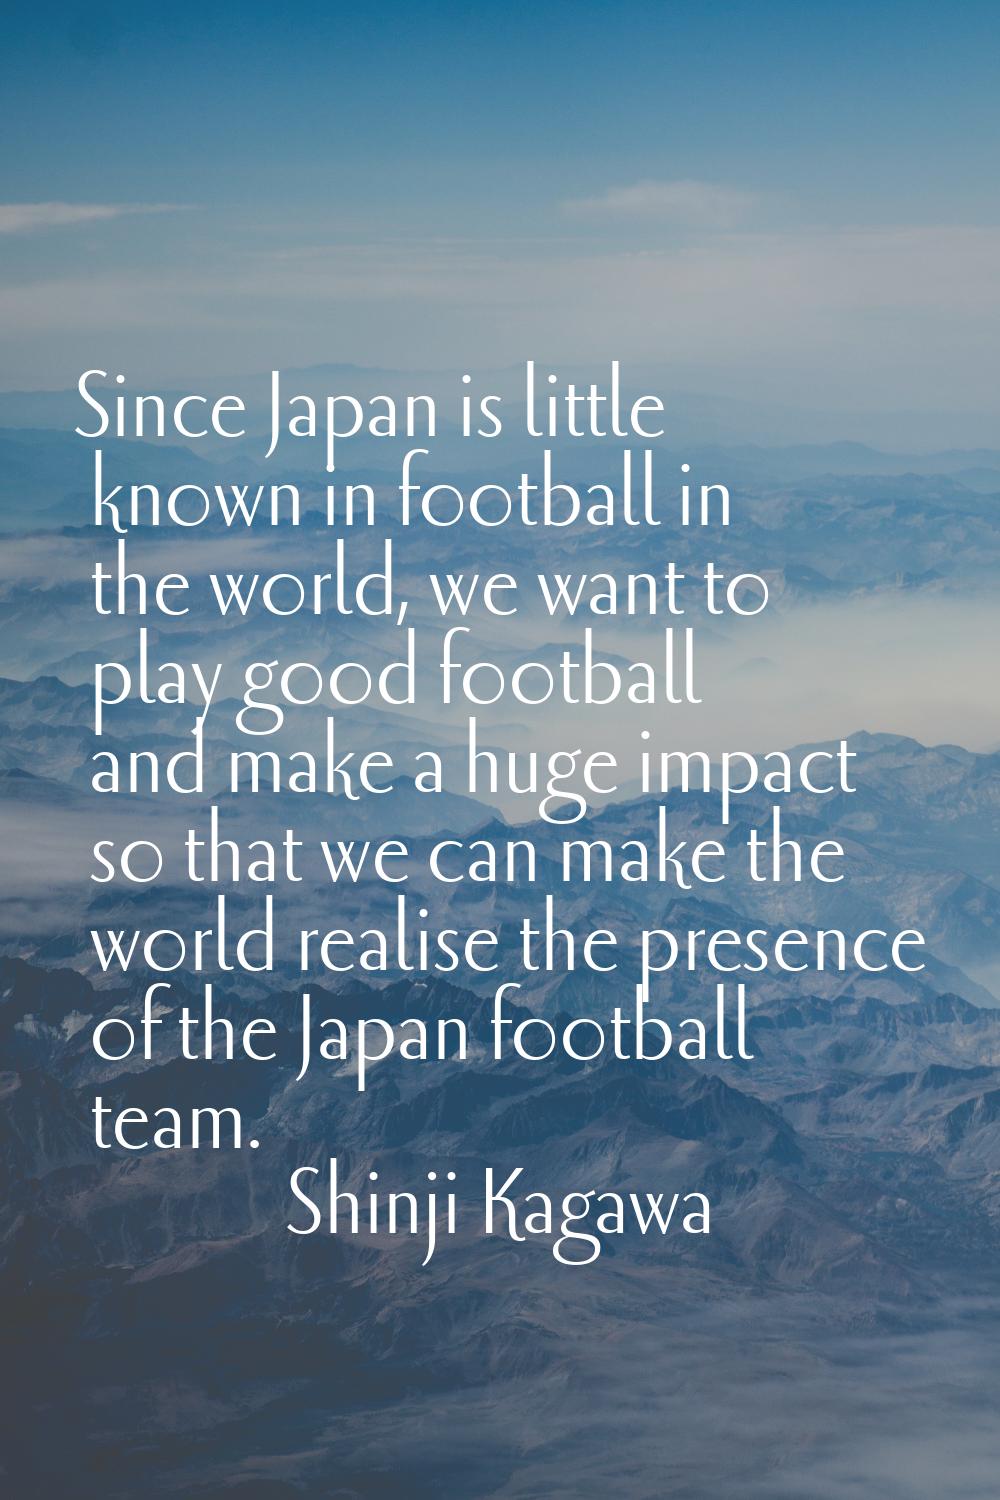 Since Japan is little known in football in the world, we want to play good football and make a huge